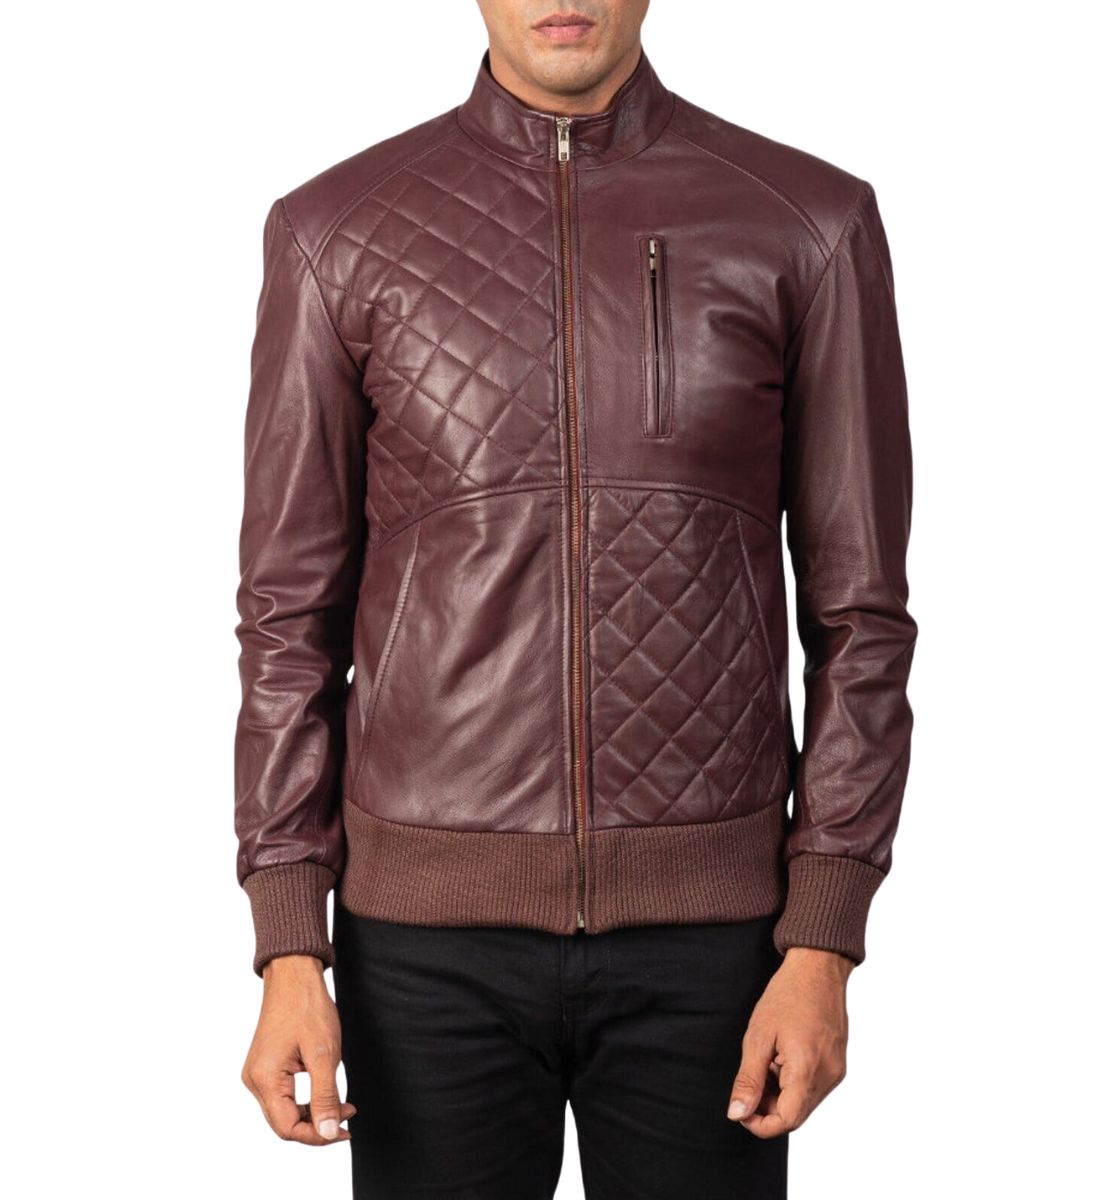 Maroon Leather Rider's Jacket closed zip